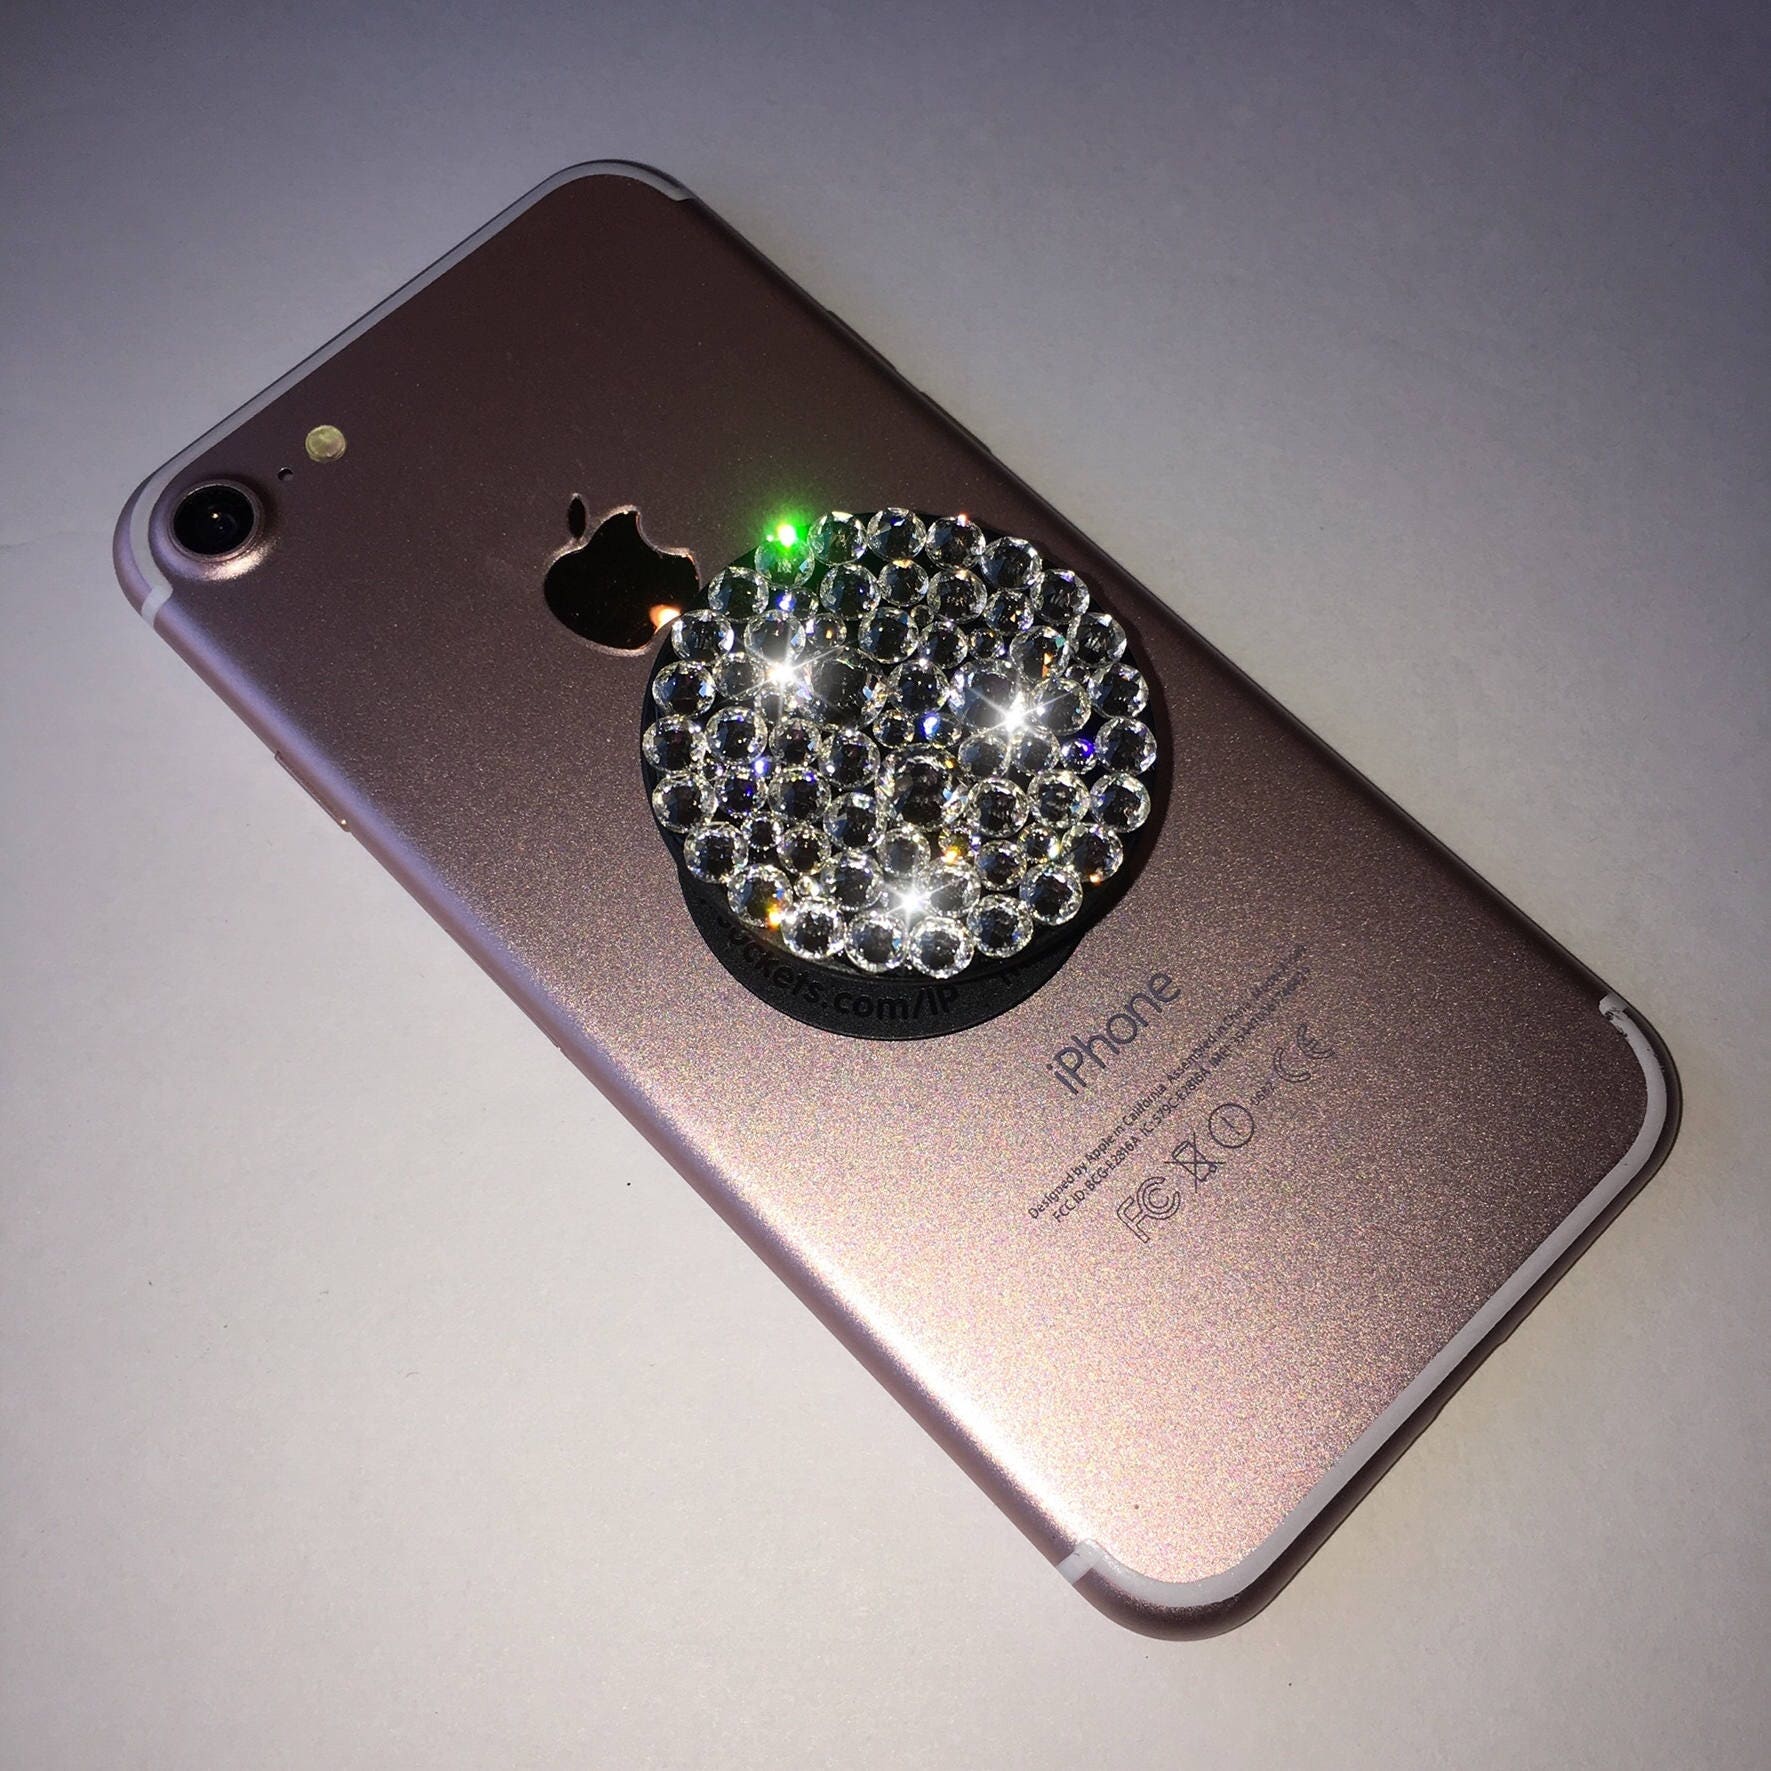 Popsockets, now with Swarovski level bling. Oooh, pretty!